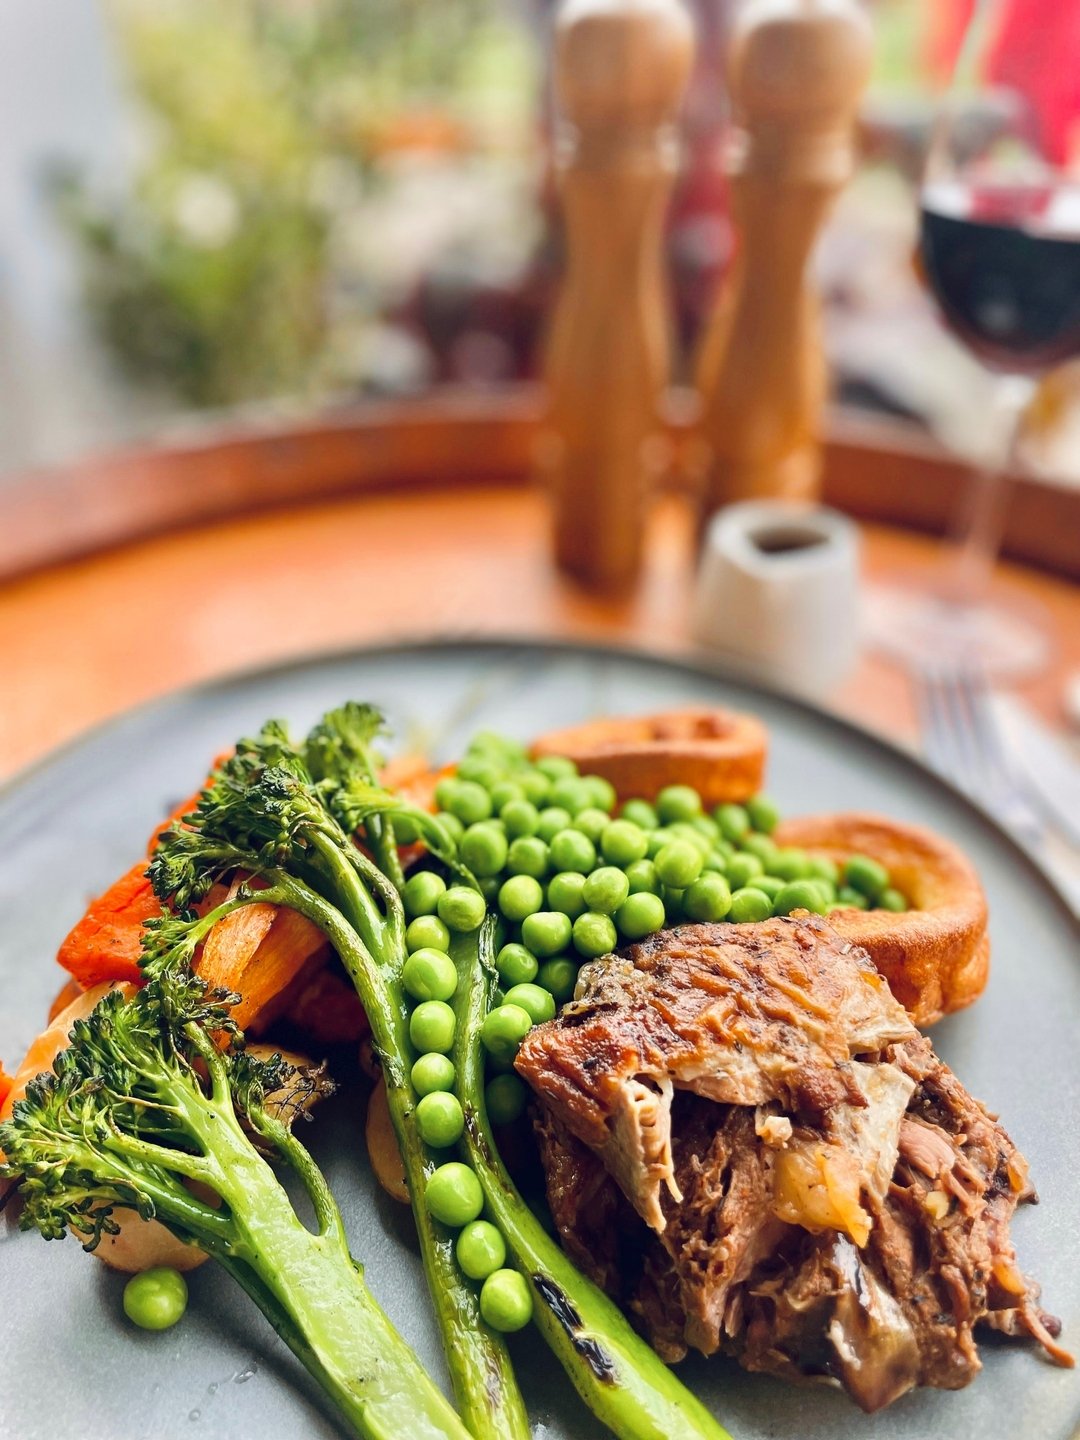 Don't let the rain put a damper on your enjoyment of Sunday roast! Come on over every Sunday to your local backyard and indulge in one of our NEW and already famous Sunday Roasts! 🌧️🍽️🌟
-
-
-
#thelocalsbackyard #homeawayfromhome #thefieldbar #thef